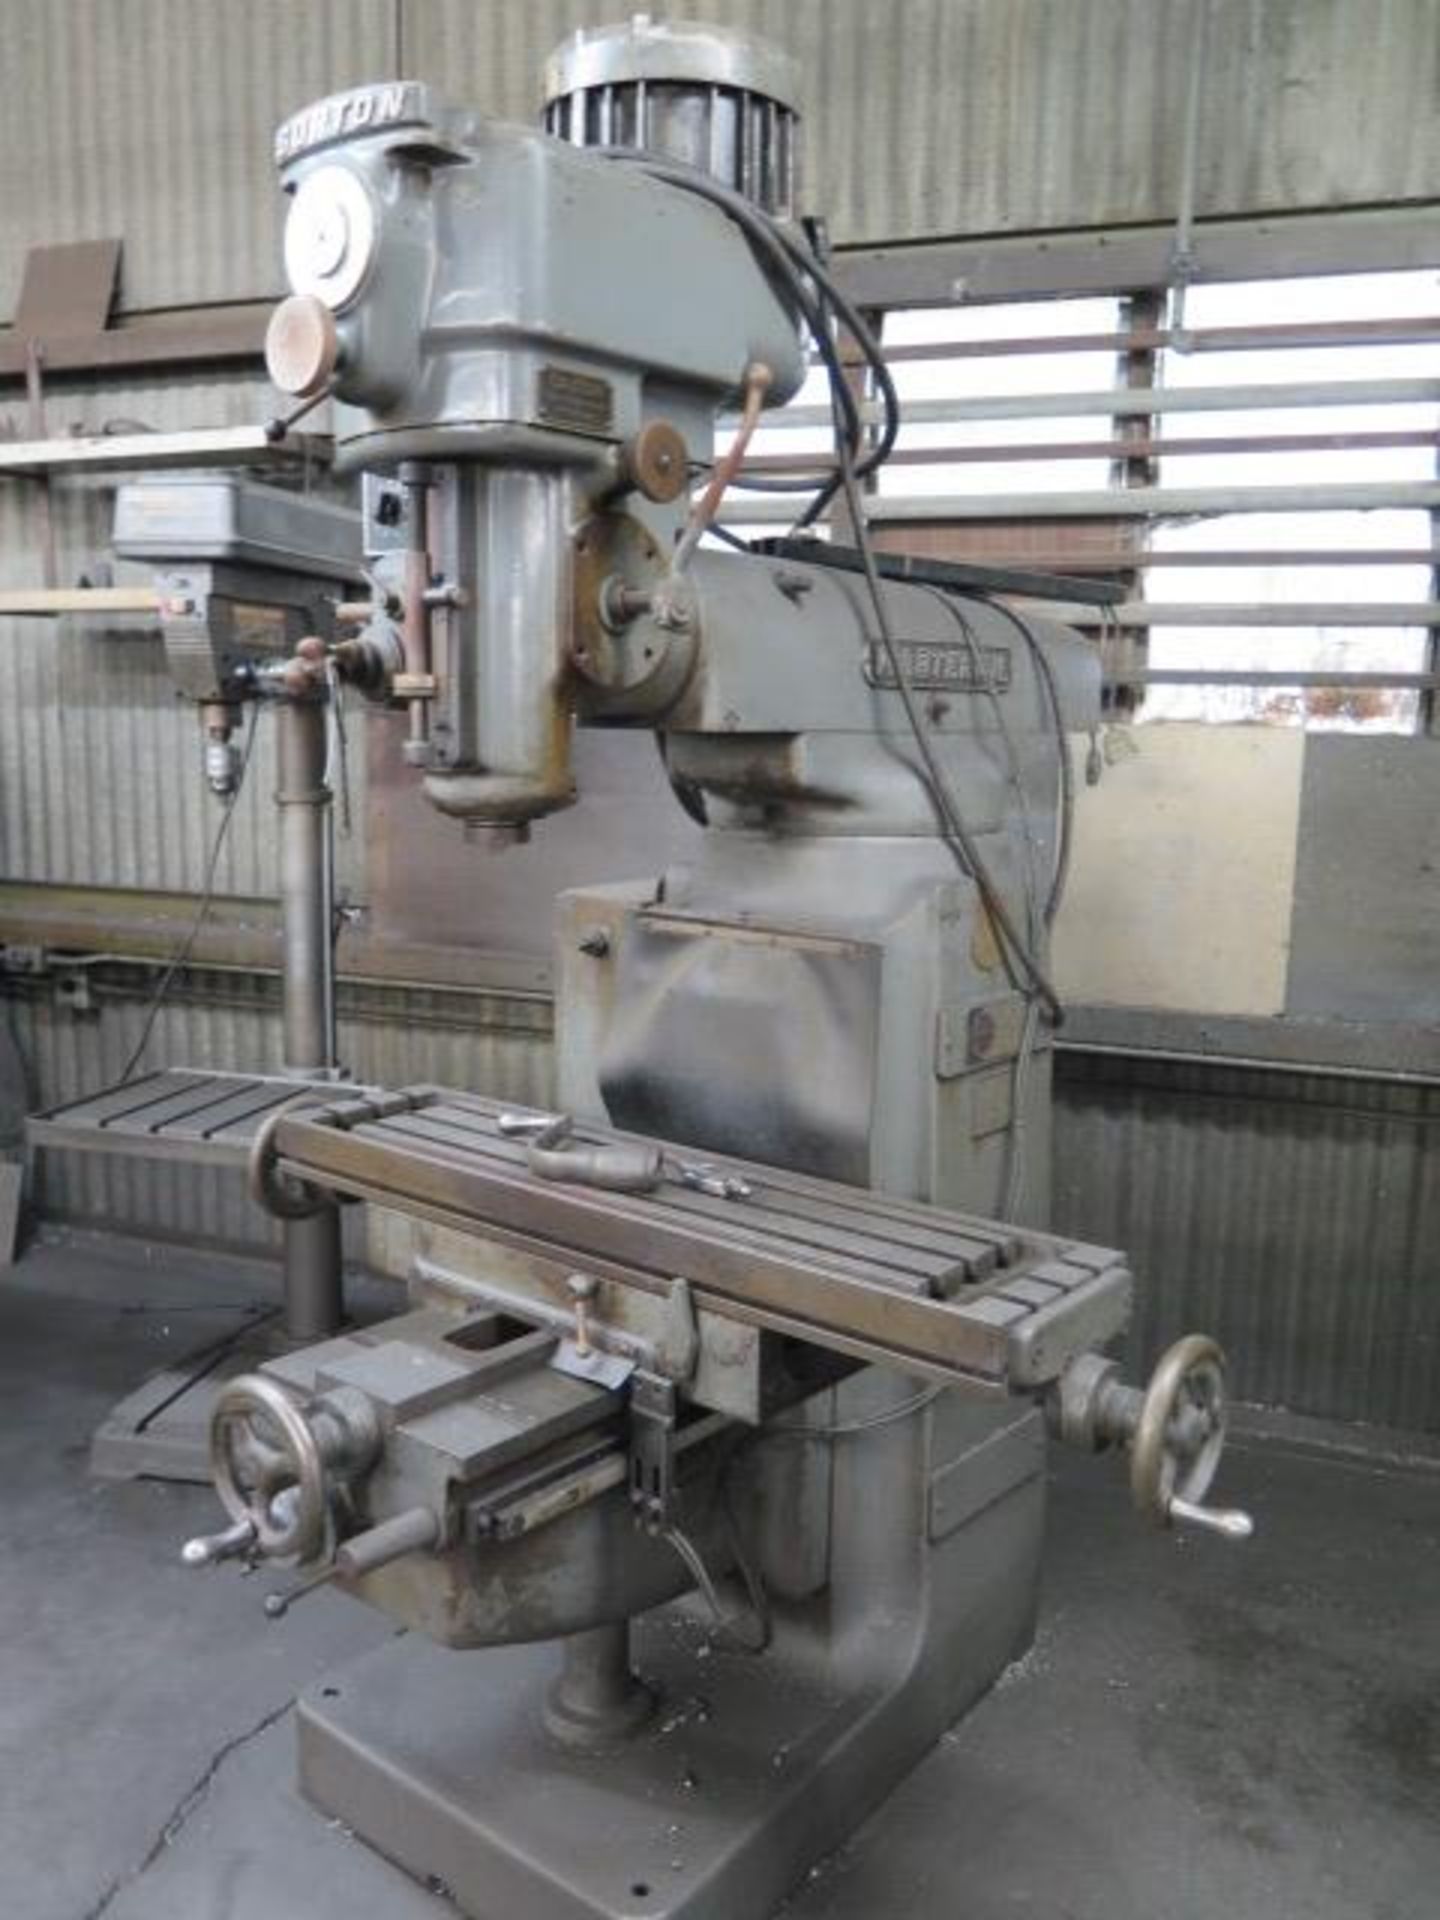 Gorton mdl. 1-22 “Mastermill” Vertical Mill w/ 80-5600 RPM, 40-Taper Spindle, SOLD AS IS - Image 2 of 9